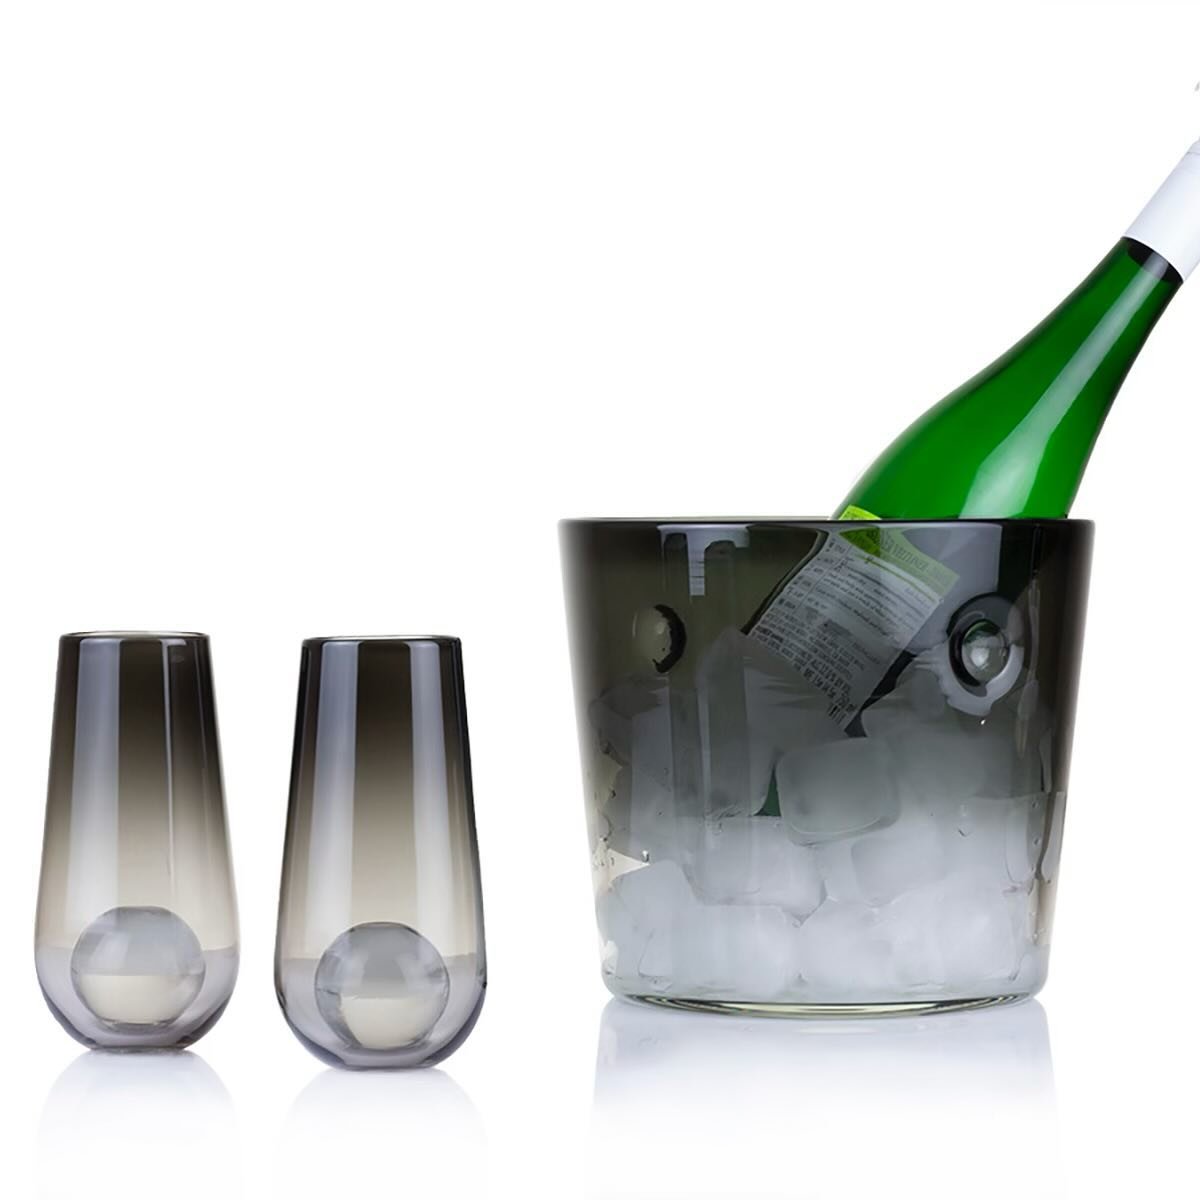 Step up #WineWednesday with this gorgeous handblown ice bucket and champagne flutes by @natecotterman 🪩🤍 #MirrorballGallery

#natecotterman #glass #art #artgallery #artglass #blownaway #champagne #home #luxe #cheers #mirrorball